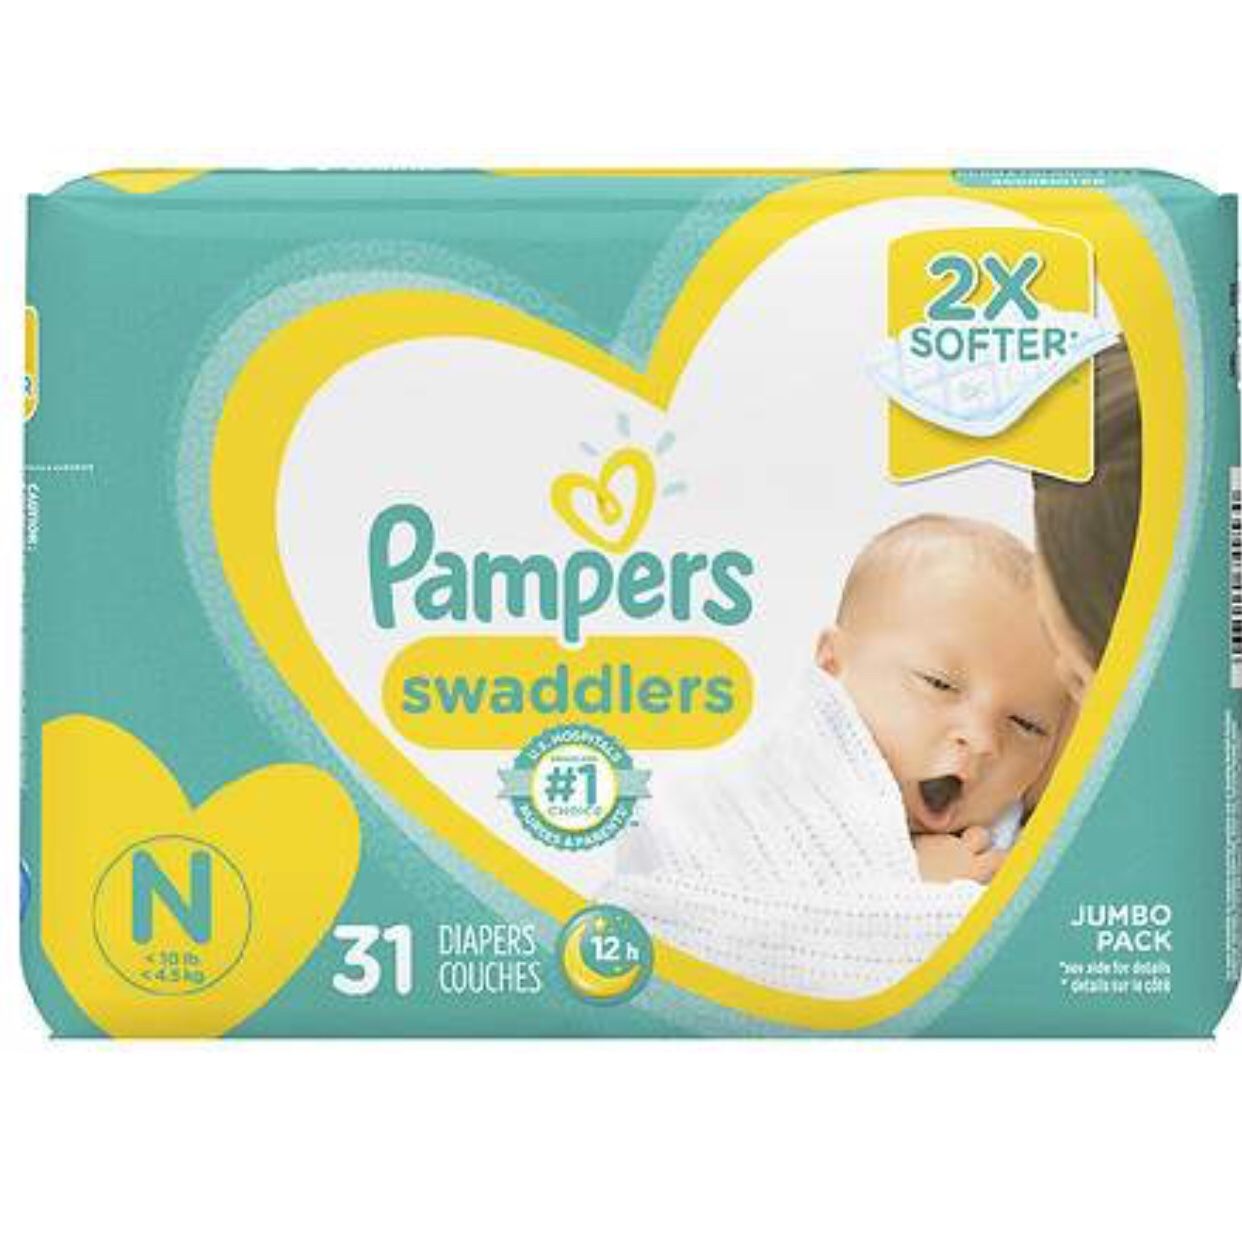 Pampers Diapers Newborn - 31 Diapers Each Pack